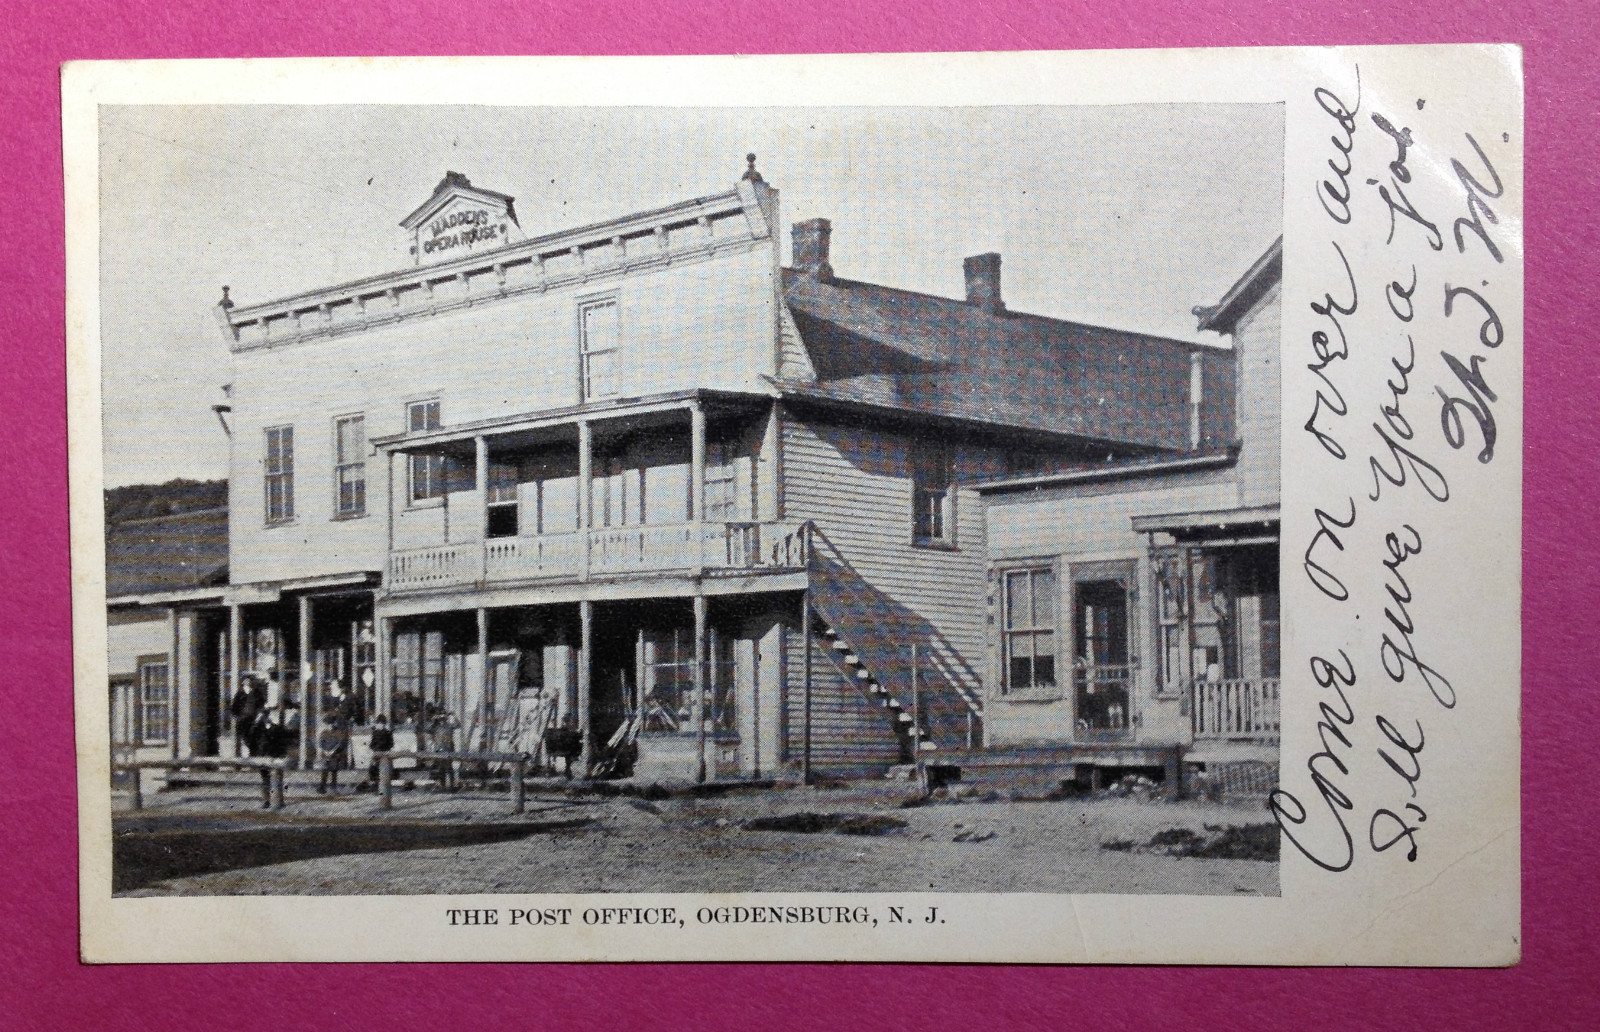 Ogdensburg - The Post Office and some other things as well from the looks of it - c 1910